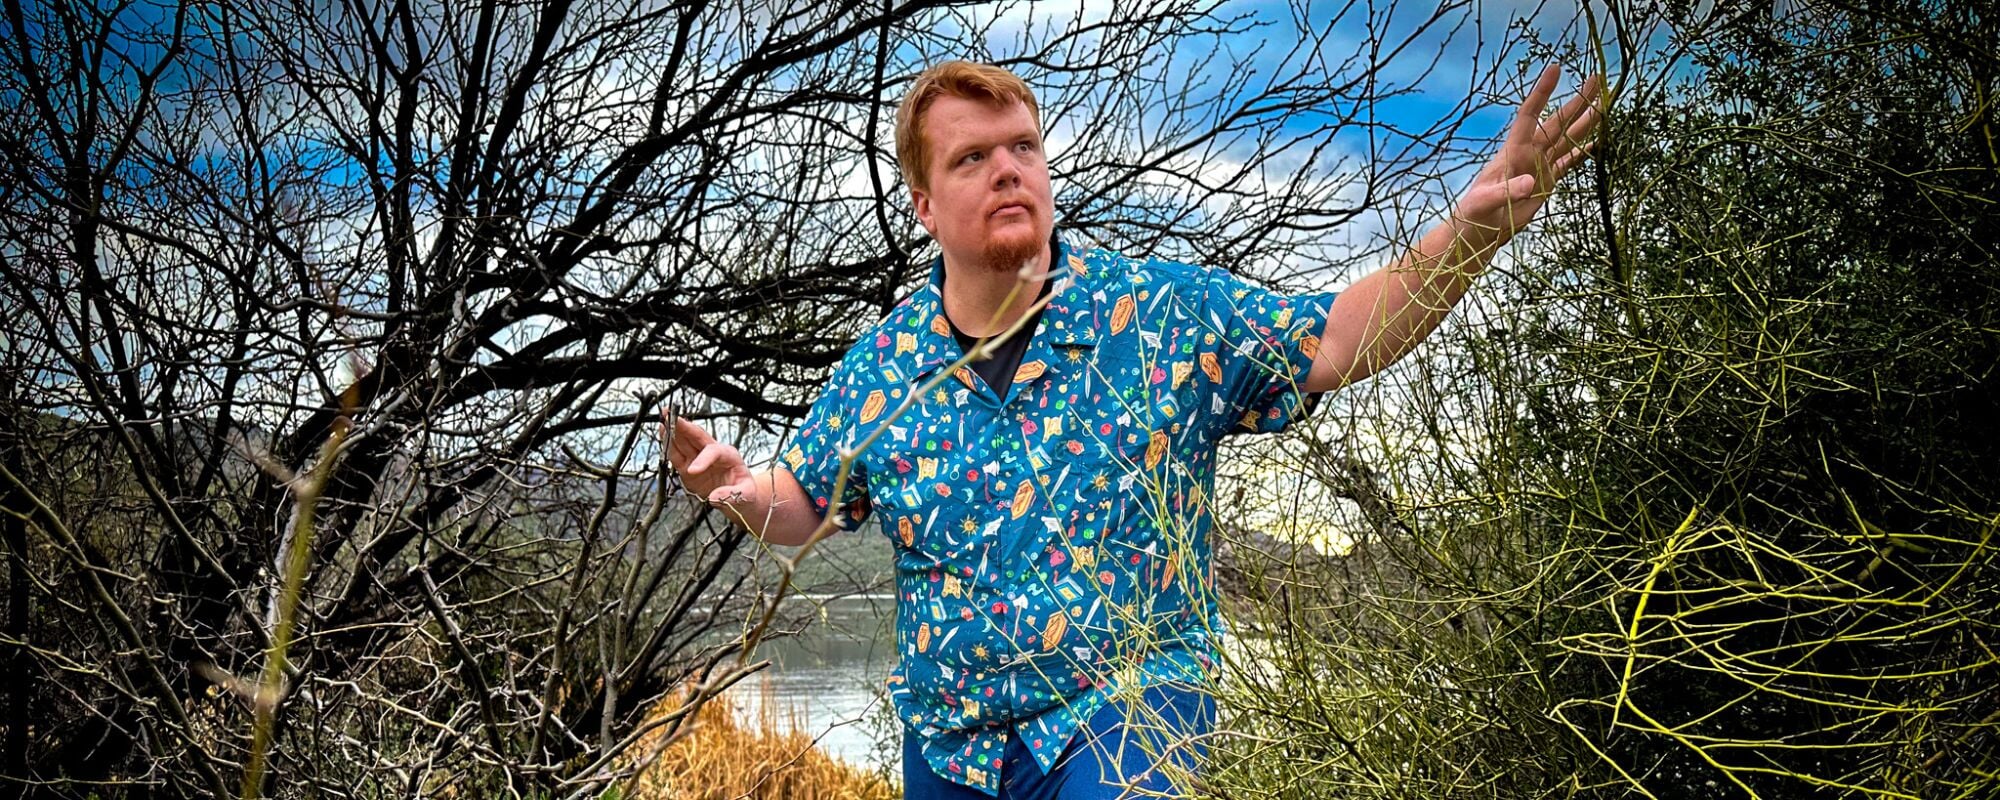 A man wearing a blue Dnd themed button-up shirt with a variety of common RPG game items including shields, weapons, maps, and potions. The shirt features a cool and unique pattern perfect for any geeky gaming enthusiast. 